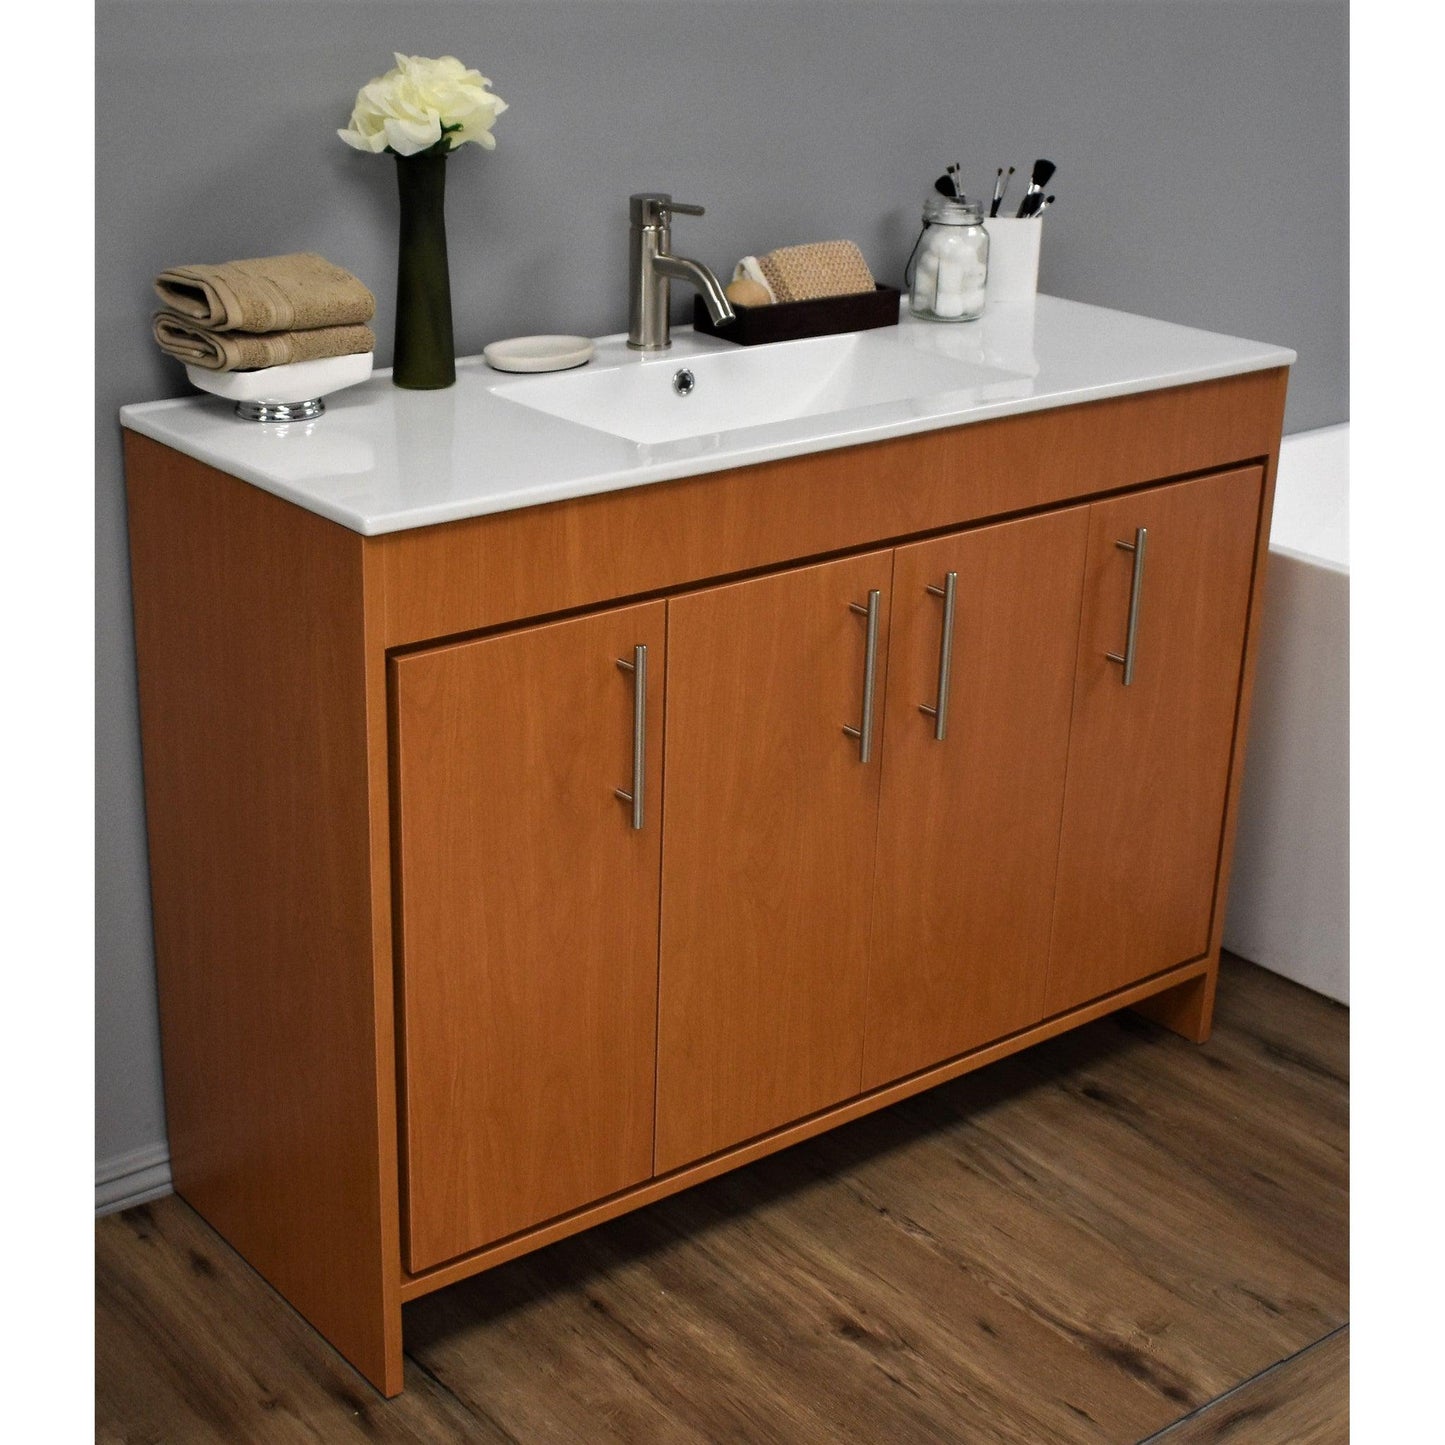 Volpa USA Villa 48" Honey Maple Freestanding Modern Bathroom Vanity With Integrated Ceramic Top and Brushed Nickel Round Handles